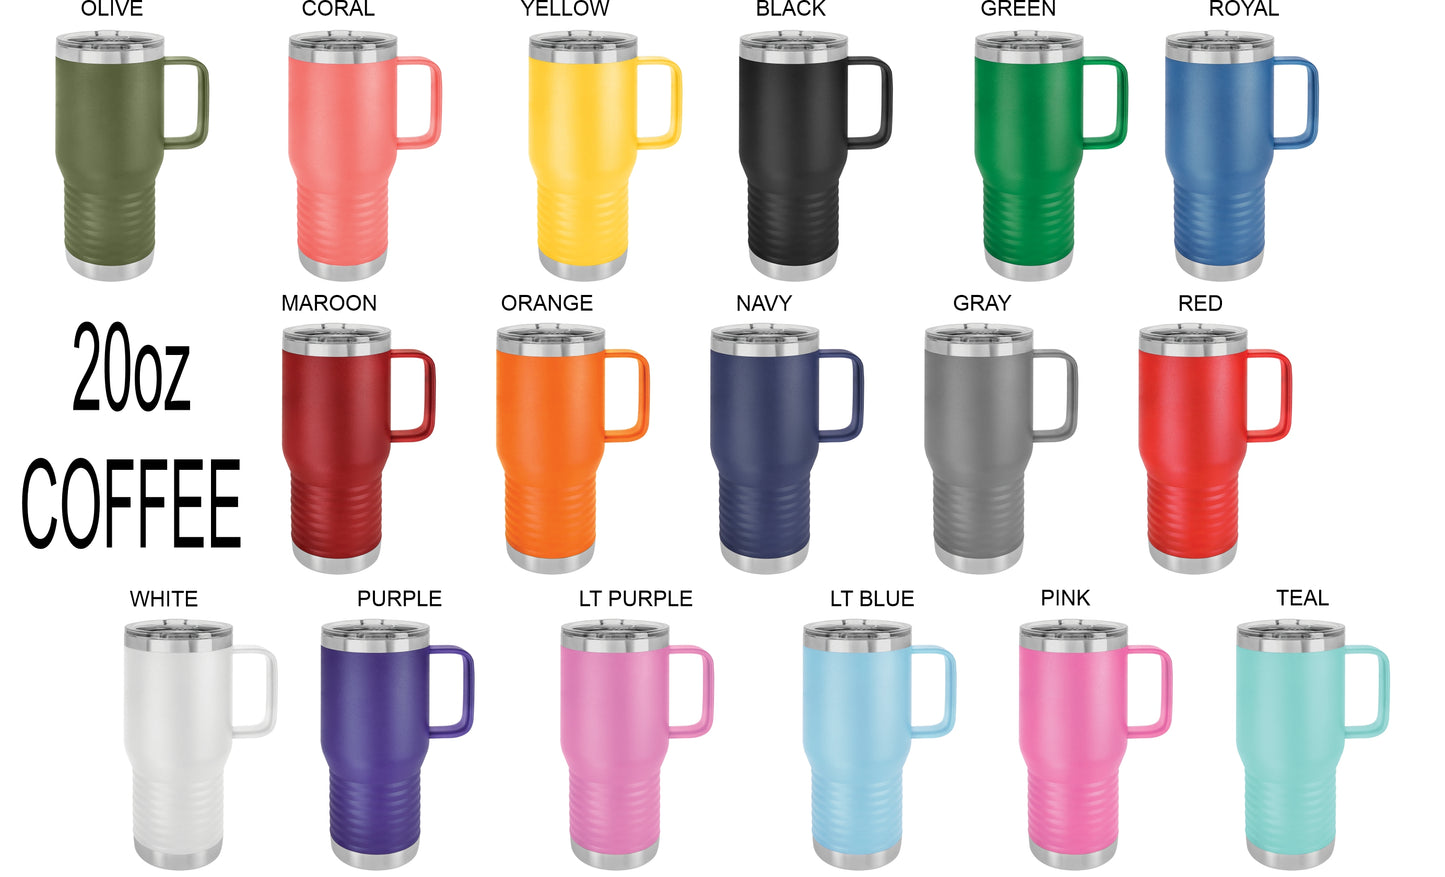 STACK LIFE TUMBLER COLLECTION